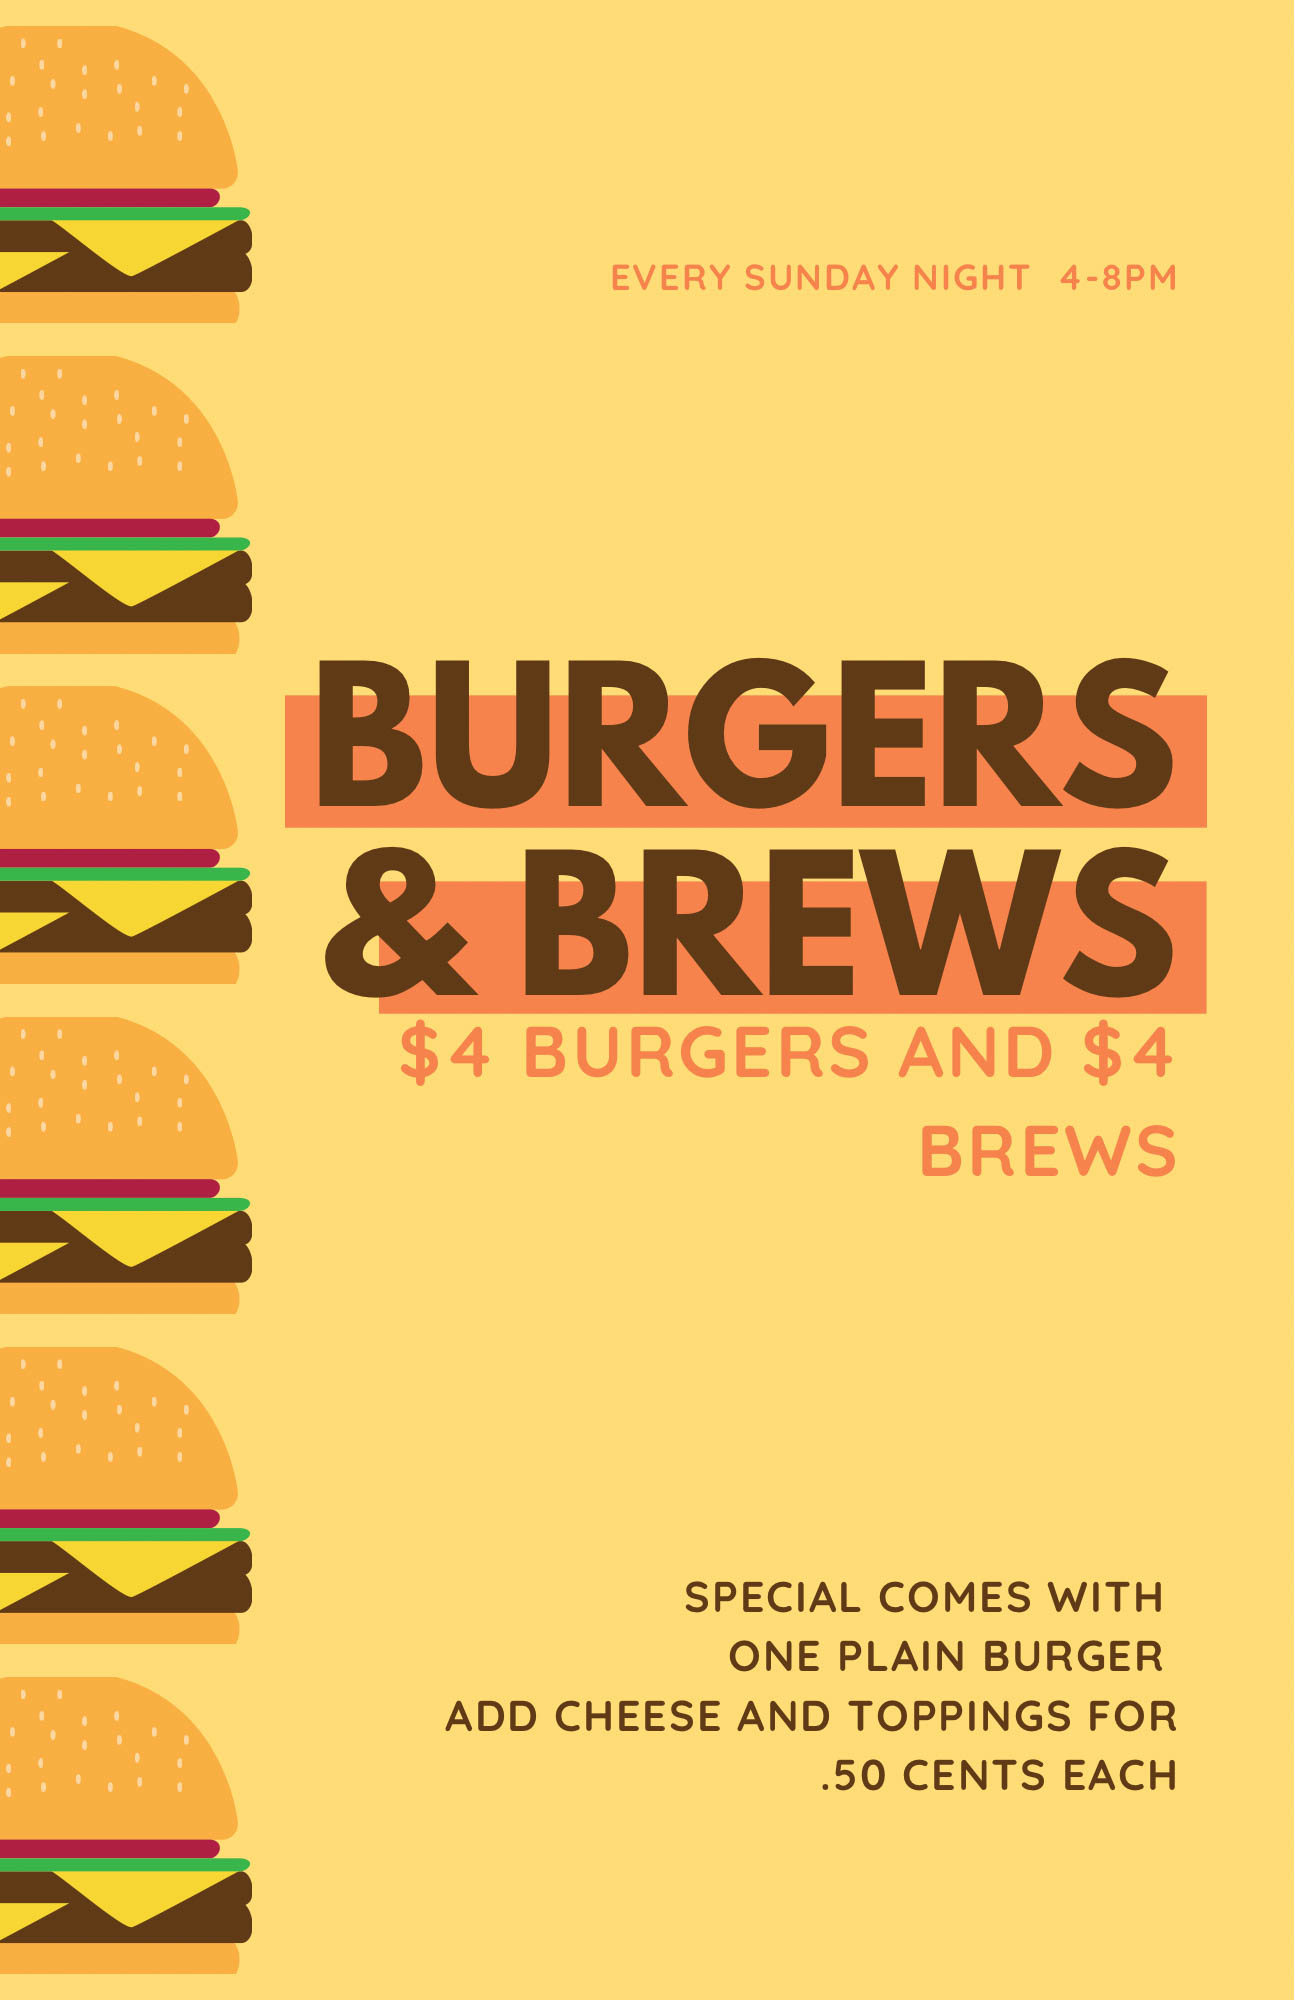 Flyer, Every Sunday night 4 to 8 pm, $4 burgers and $4 brews